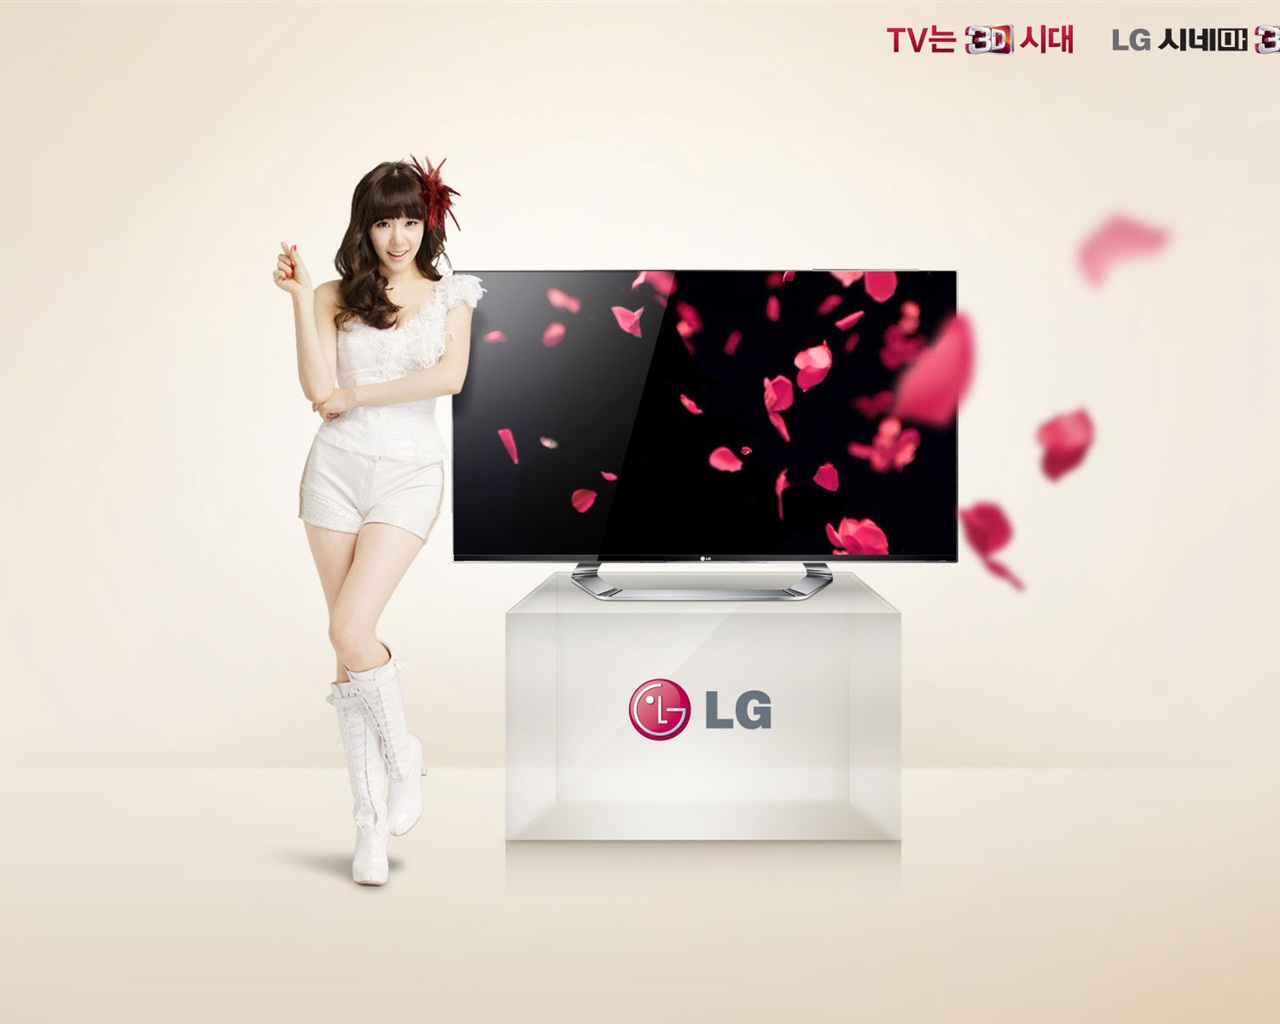 Girls Generation ACE and LG endorsements ads HD wallpapers #15 - 1280x1024